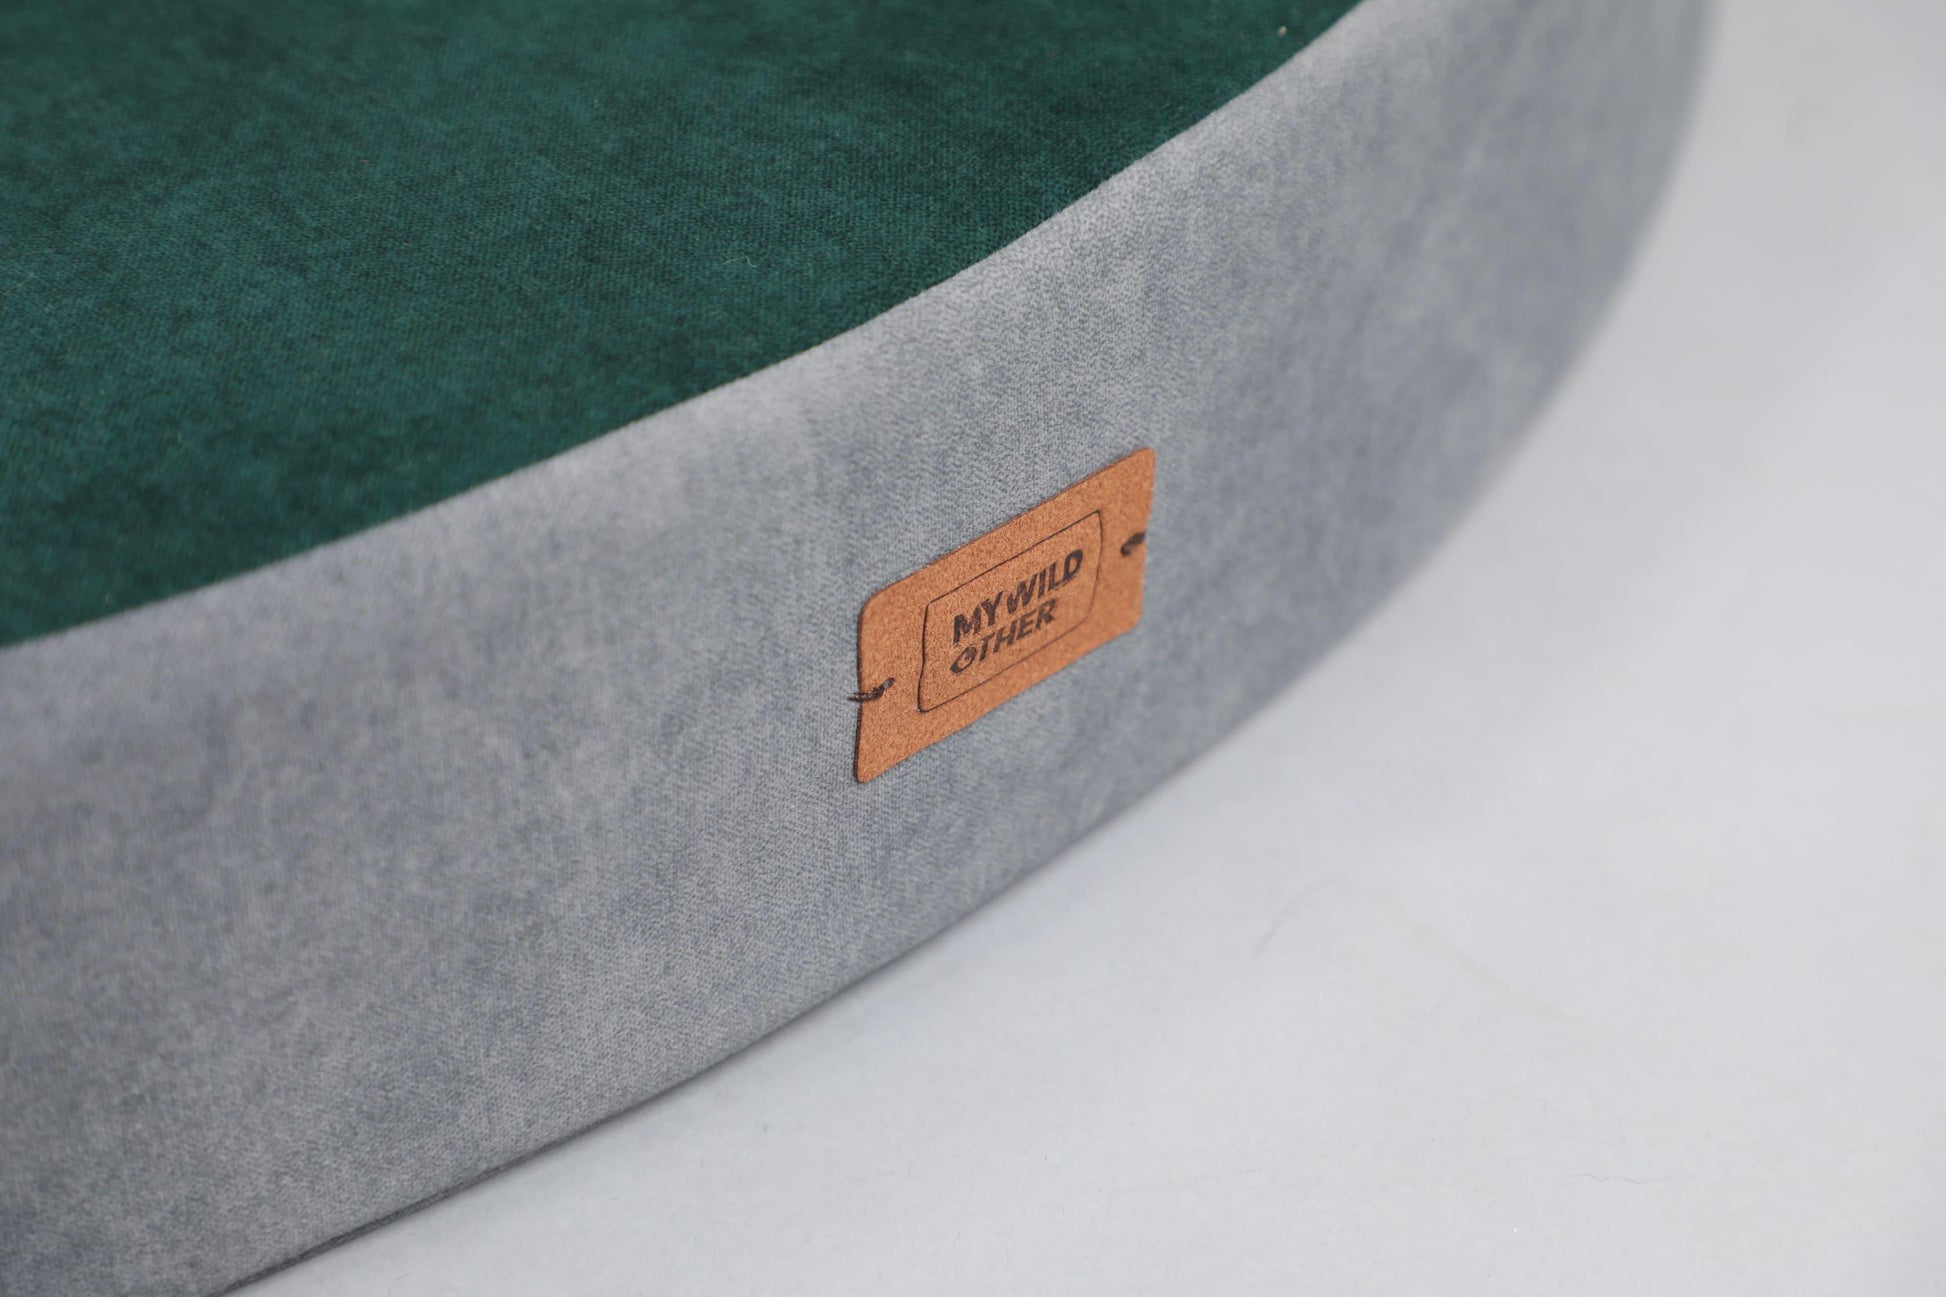 Cozy cave dog bed. STEEL GREY+MOSS GREEN - European handmade dog accessories by My Wild Other